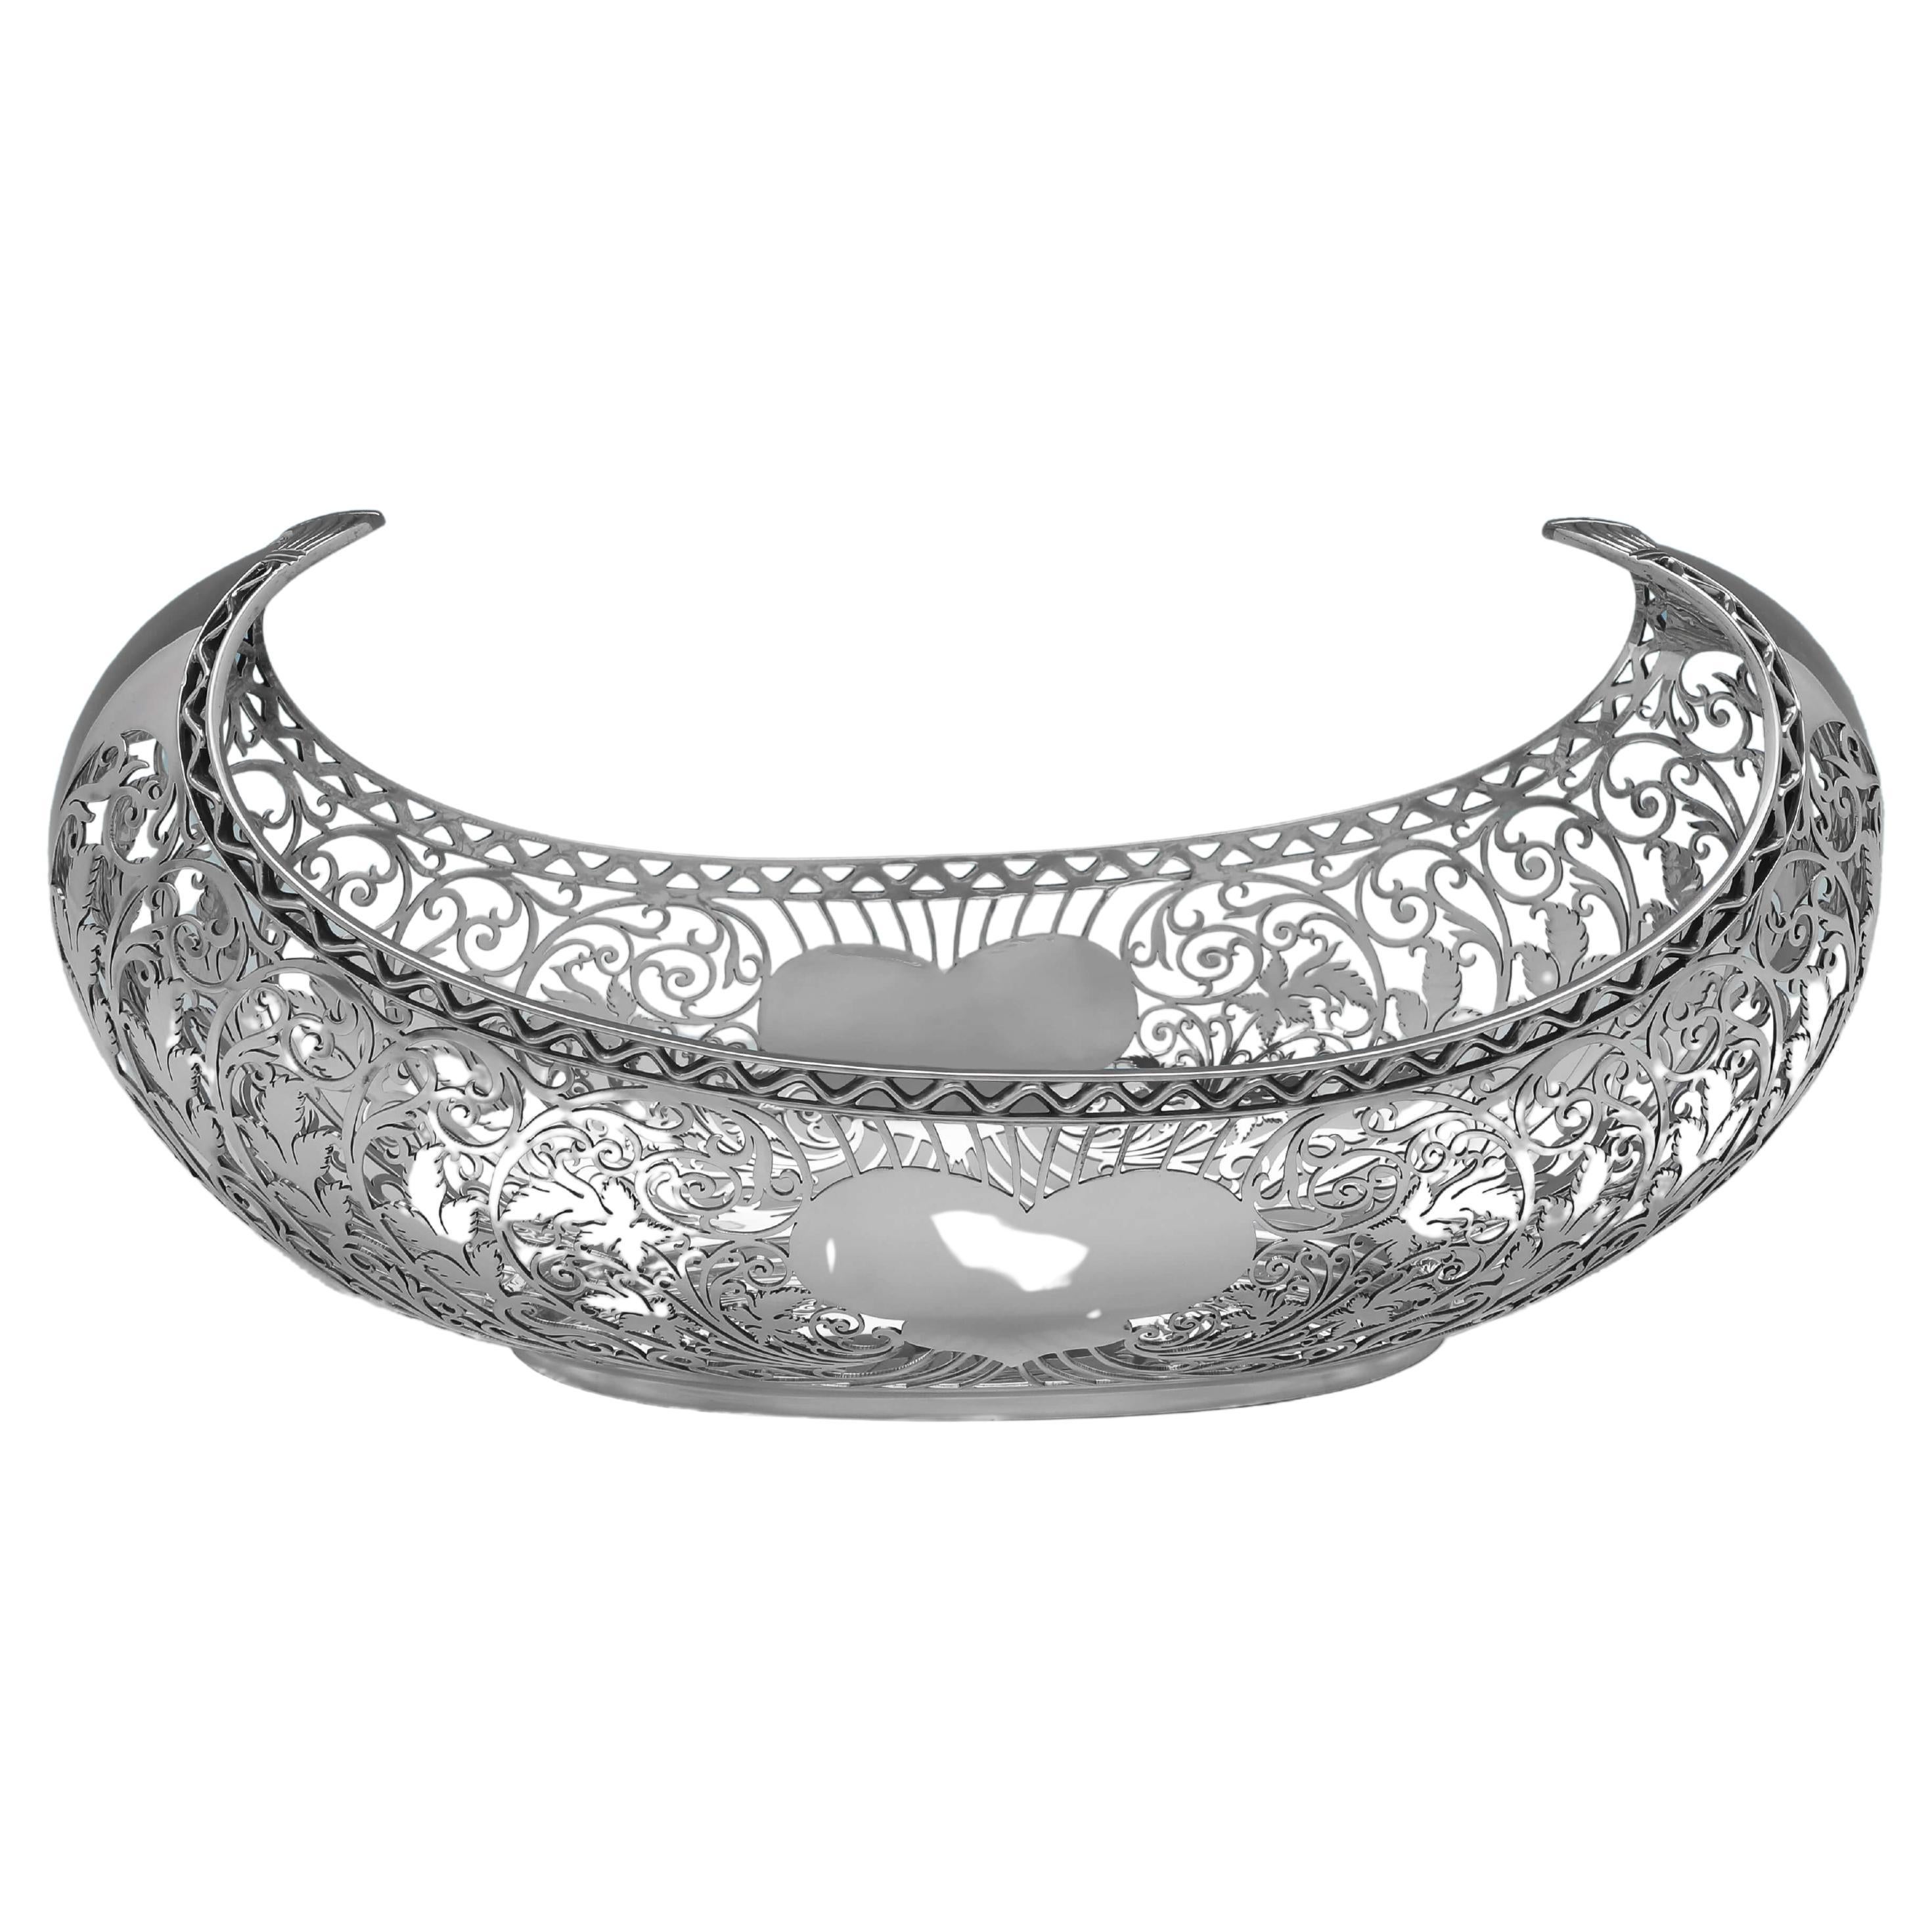 Large and Attractive Sterling Silver Centrepiece Dish - Hallmarked in 1919